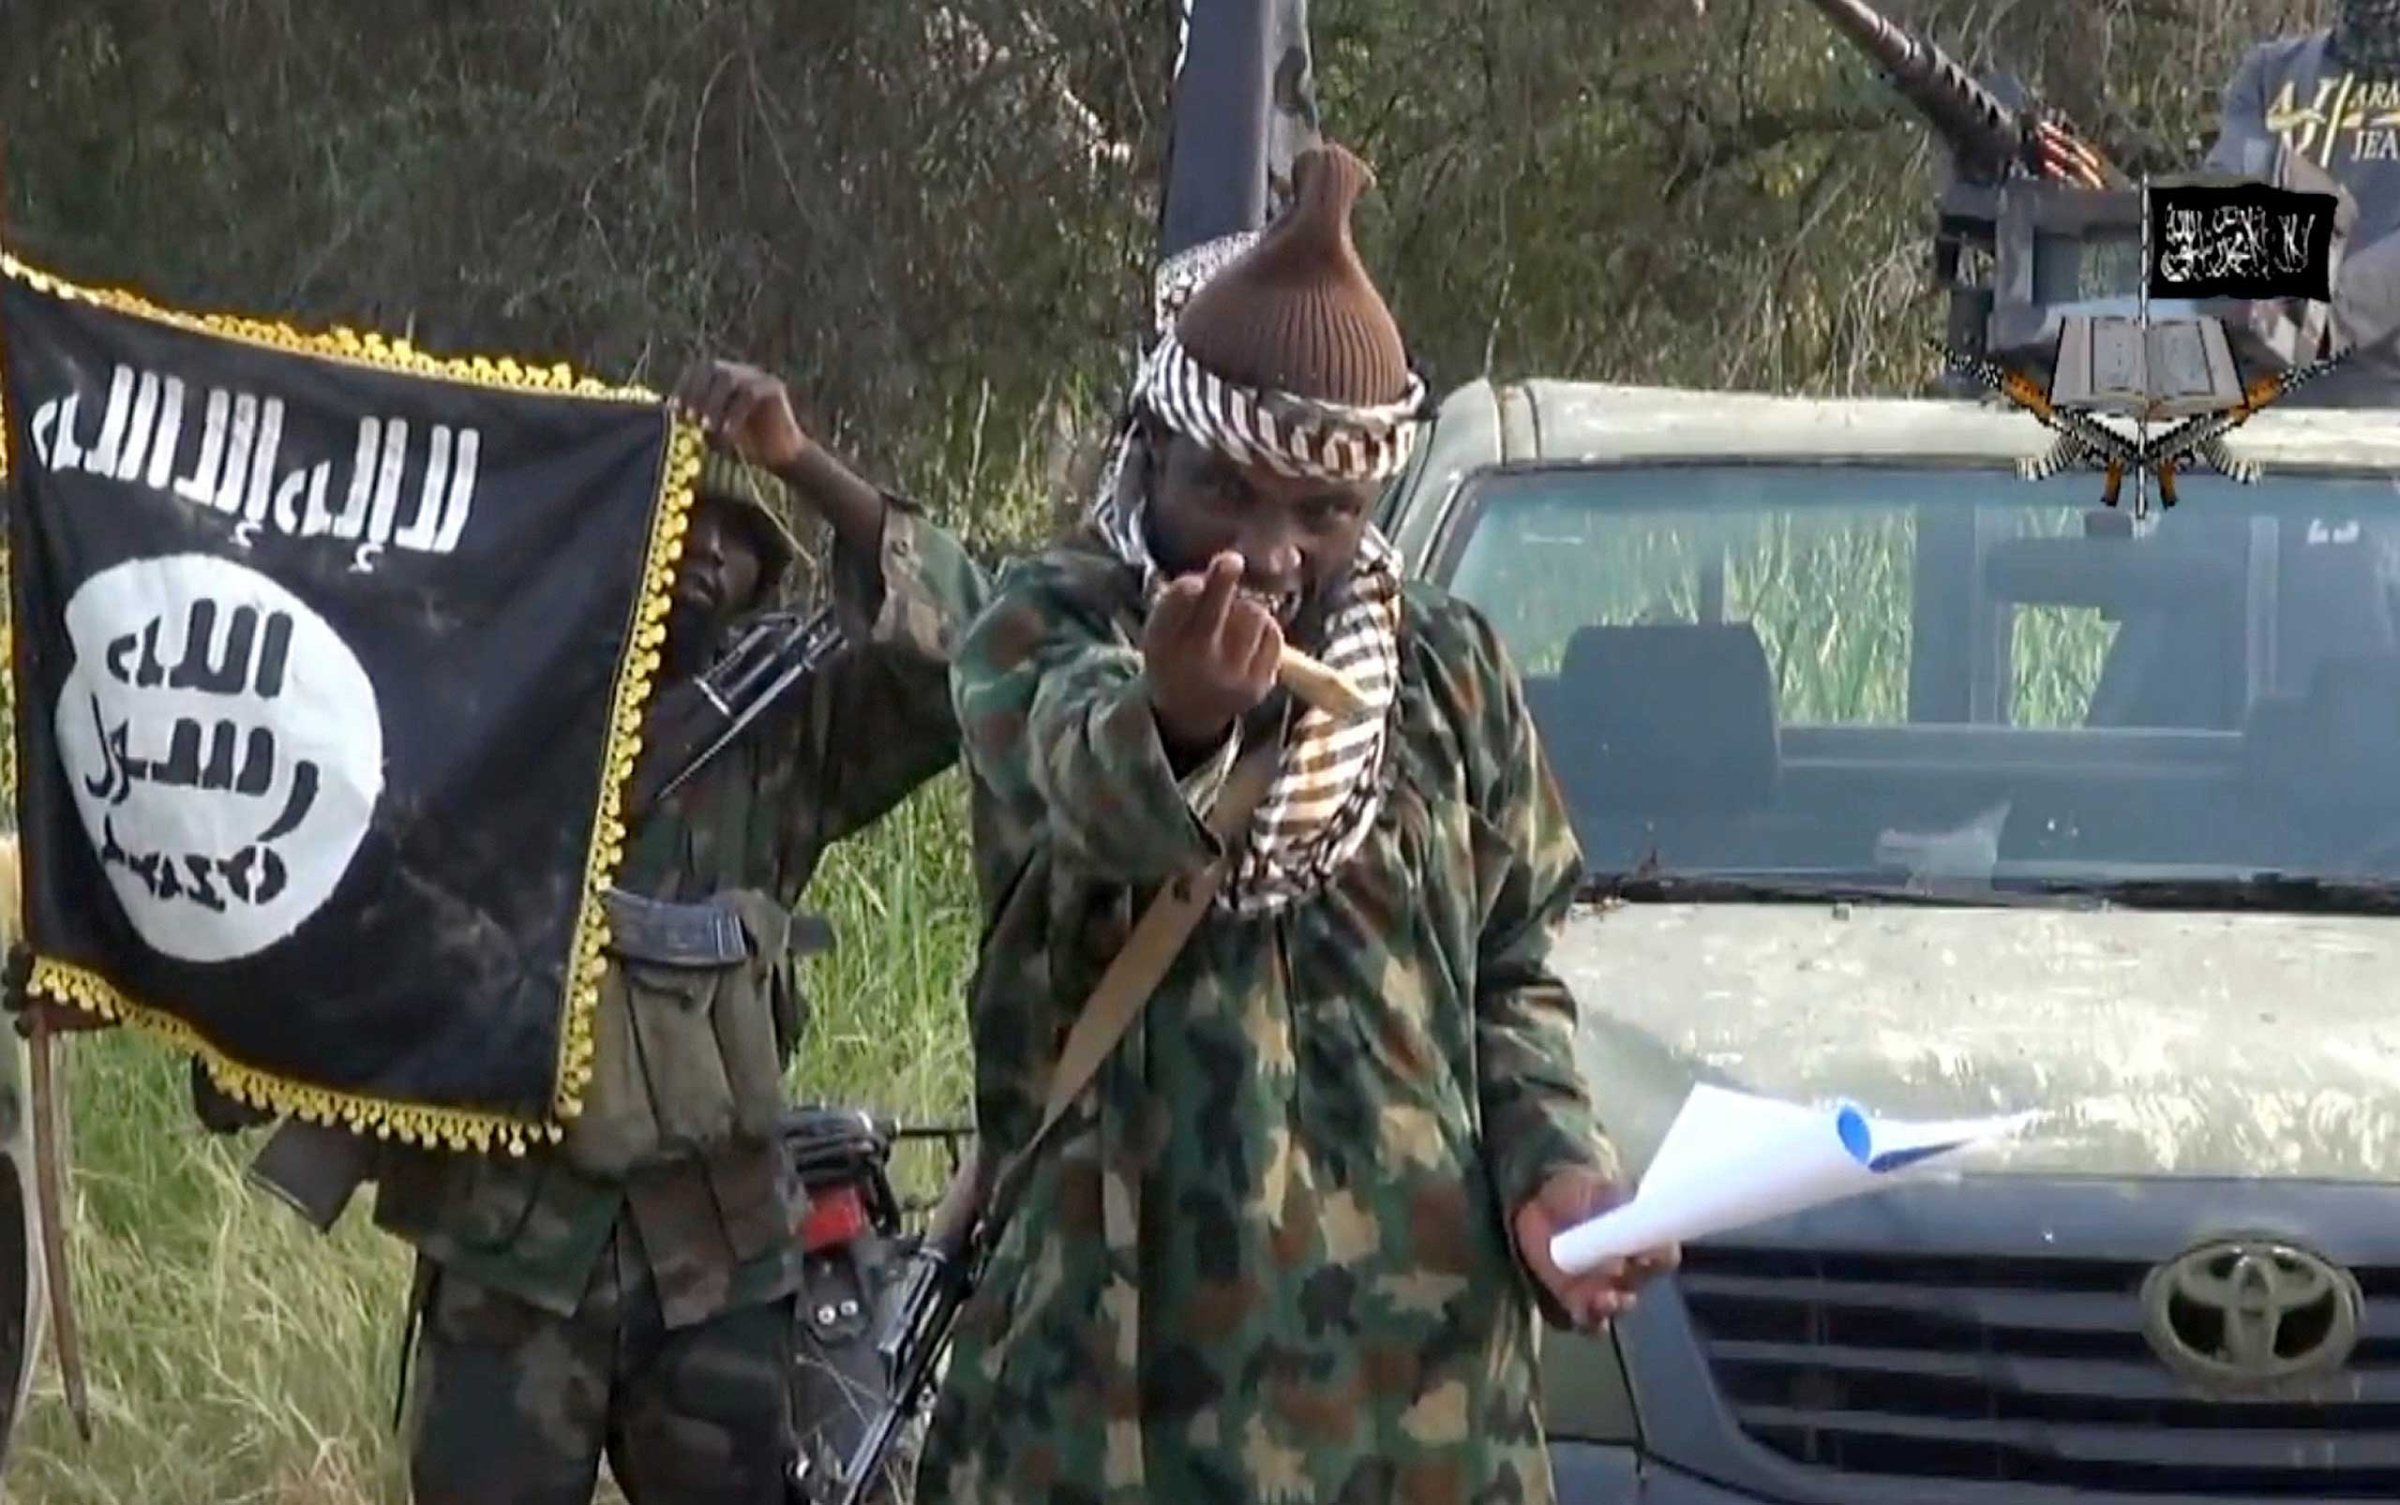 Screengrab taken on Oct. 2, 2014 from a video released by the Nigerian Islamist extremist group Boko Haram, shows group's leader Abubakar Shekau.